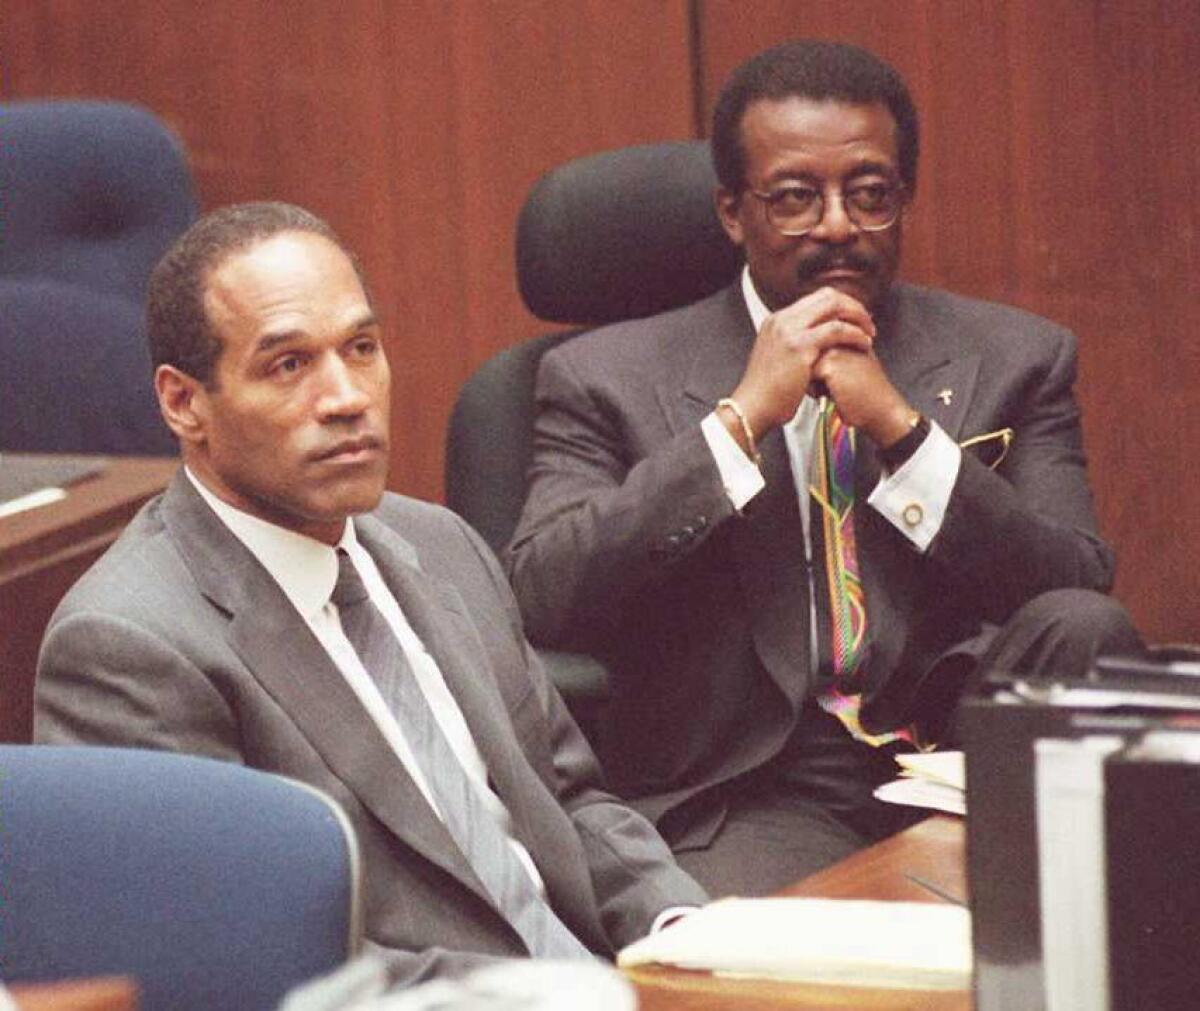 The first season of "American Crime Story" will revisit O.J. Simpson's murder trial. Simpson, left, is seen here during that 1995 trial with defense attorney Johnnie L. Cochran Jr.